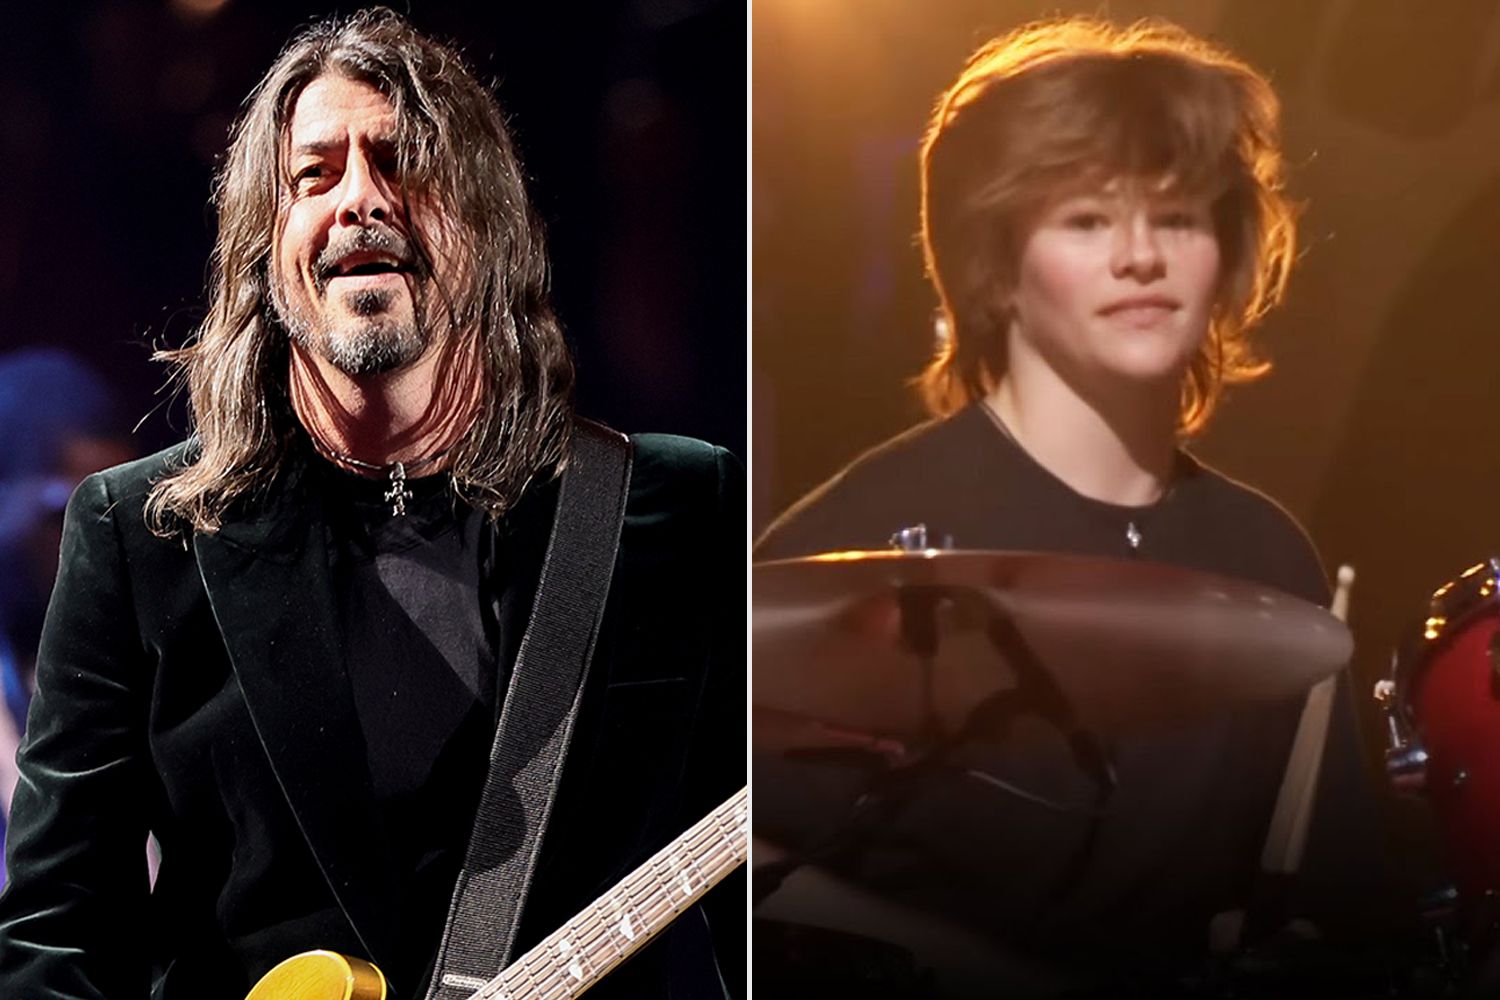 Watch Taylor Hawkins' son Shane join Foo Fighters at Boston Calling